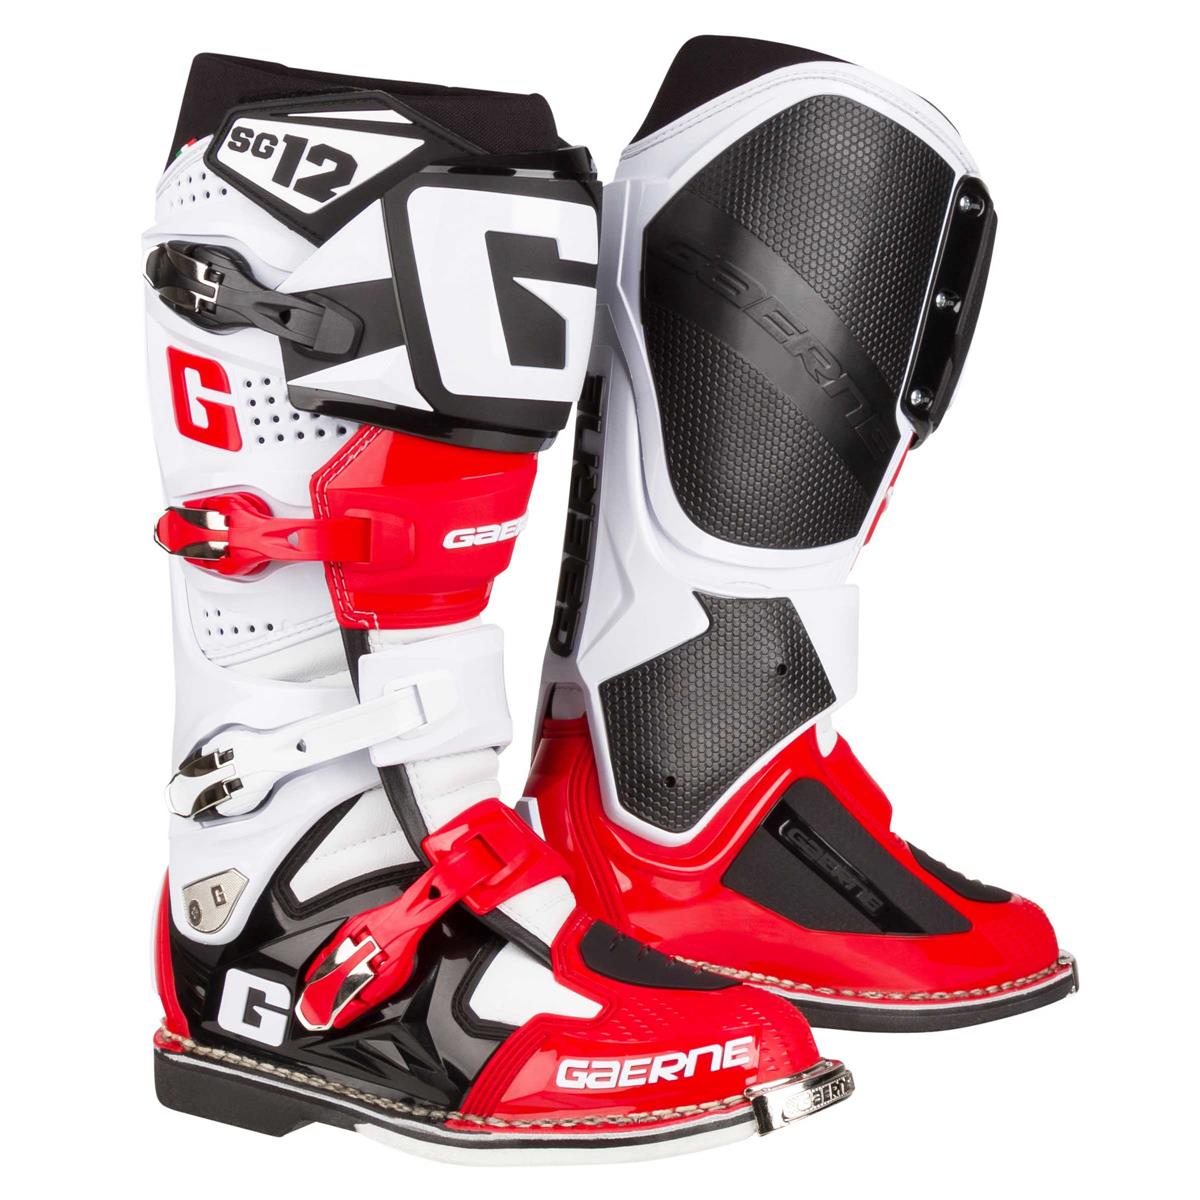 Gaerne MX Boots SG 12 Red Pepper - Limited Edition